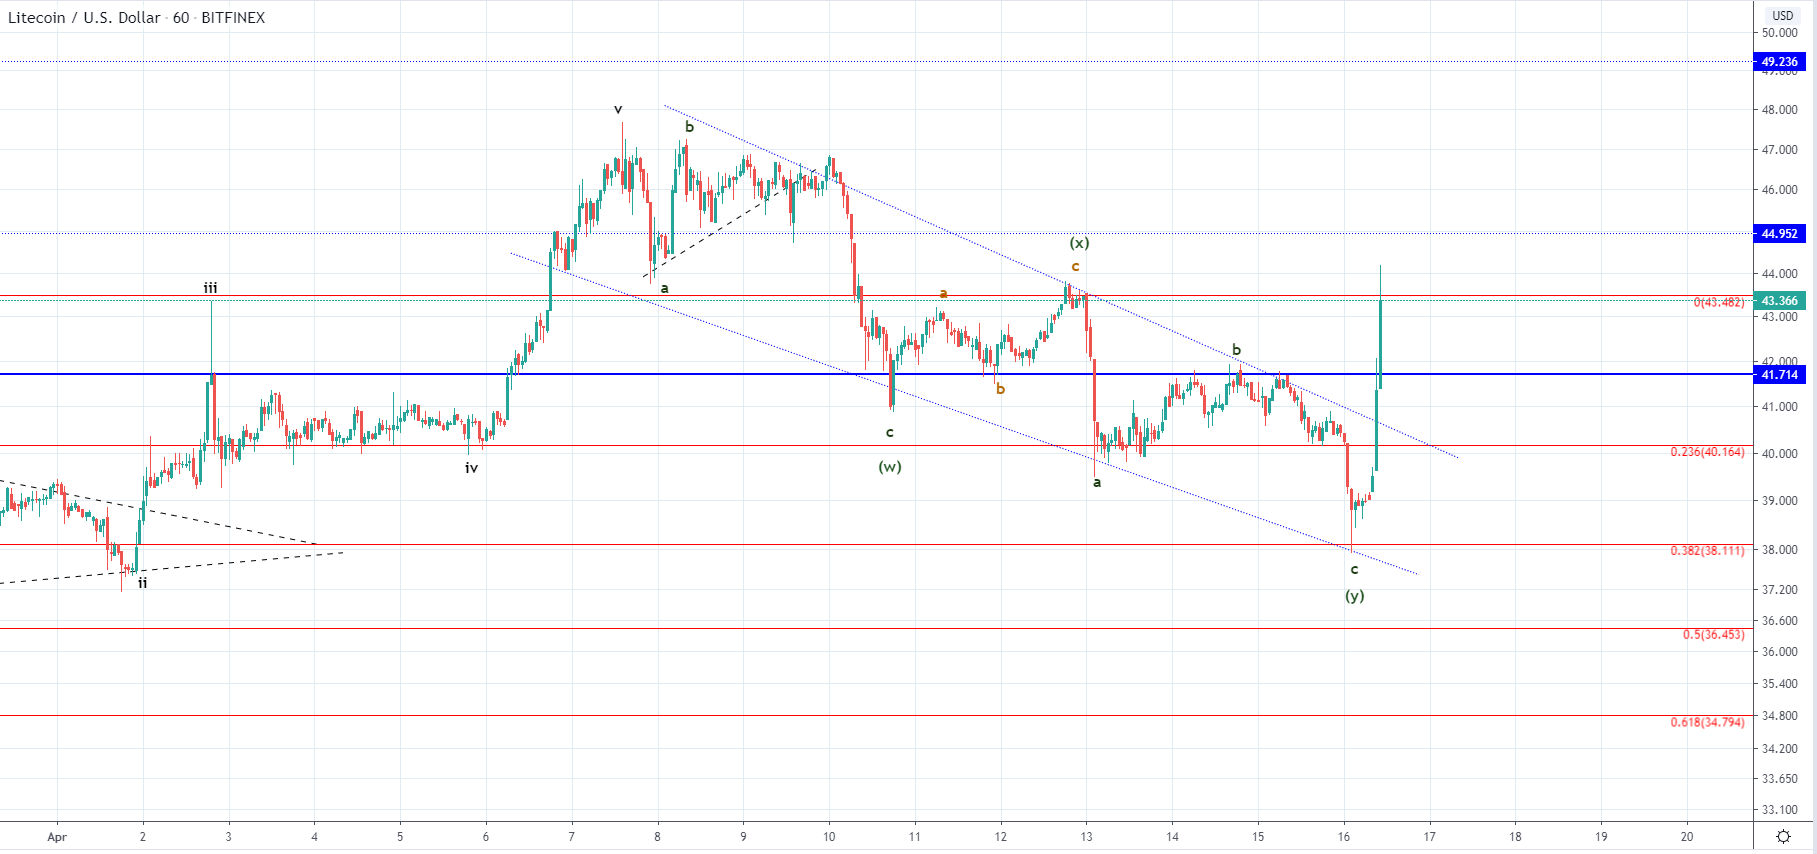 LTC and EOS - Massive Spike Seen But Could Still Be Corrective